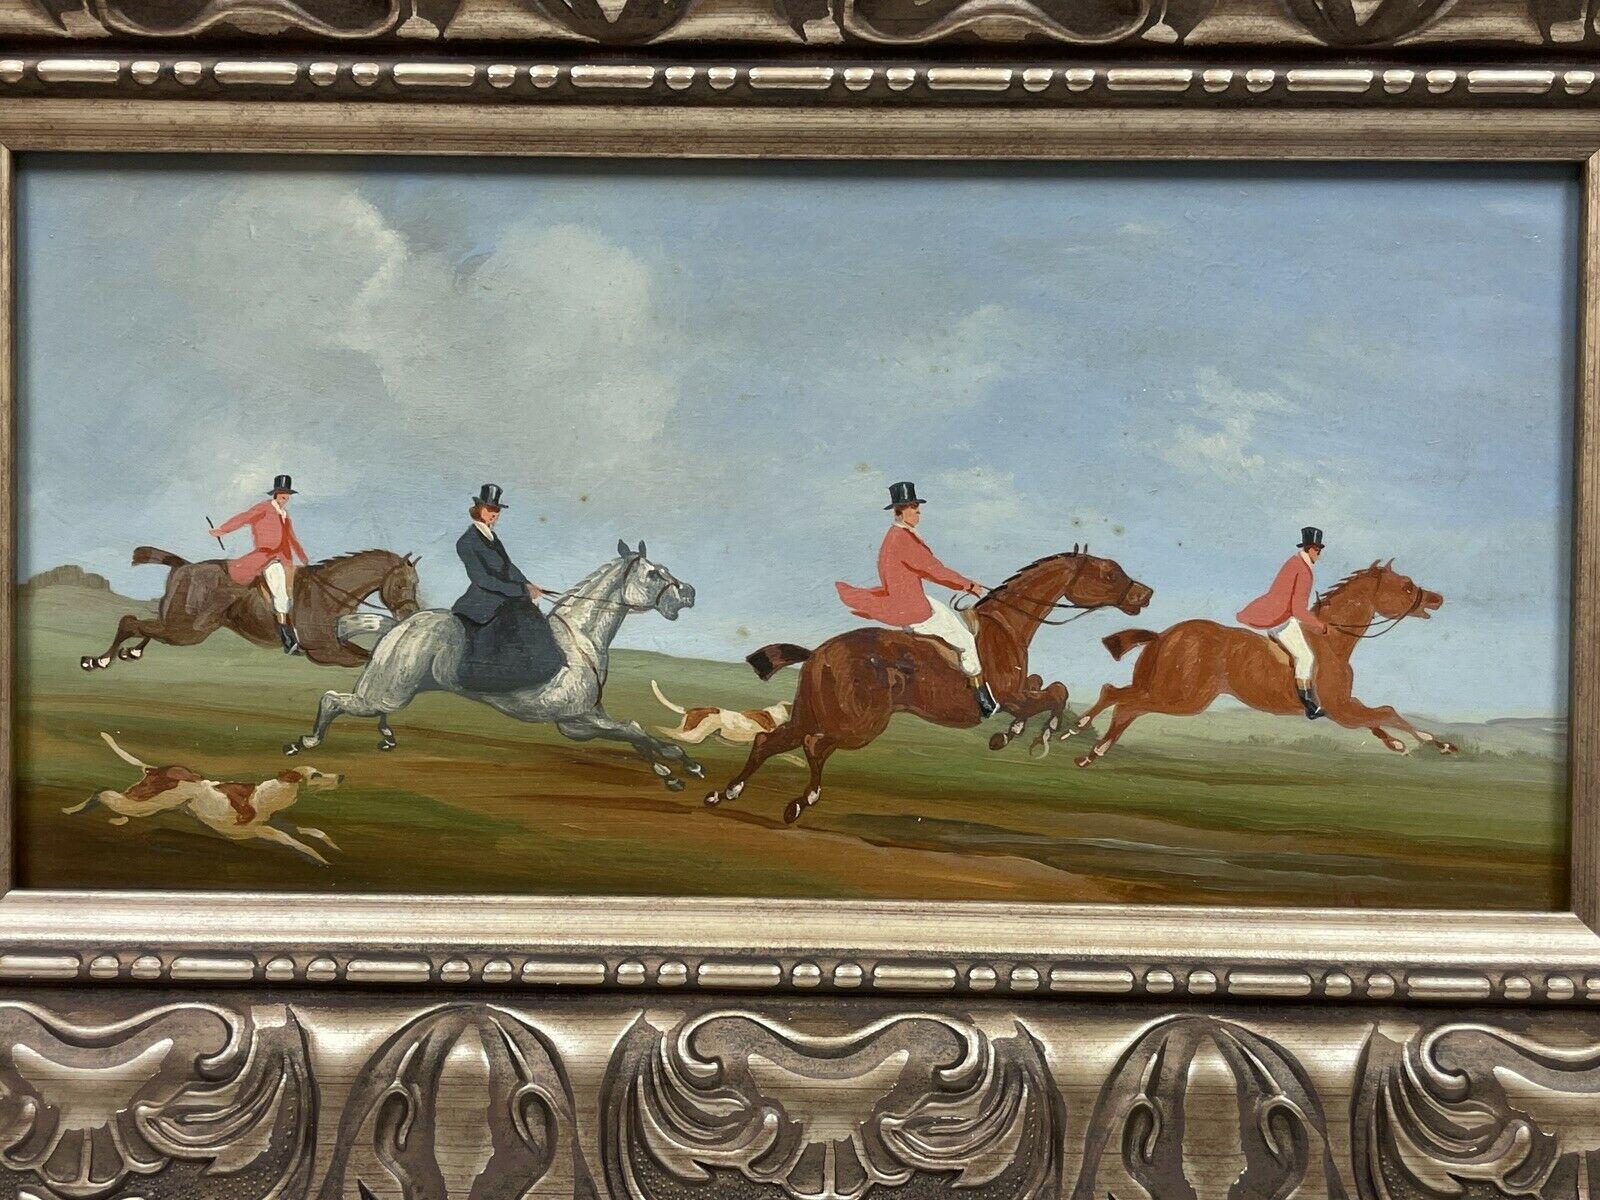 SET OF 4 ORIGINAL BRITISH OIL PAINTINGS - HUNTING SCENES - OILS ON PANEL FRAMED - Gray Landscape Painting by William Rowland